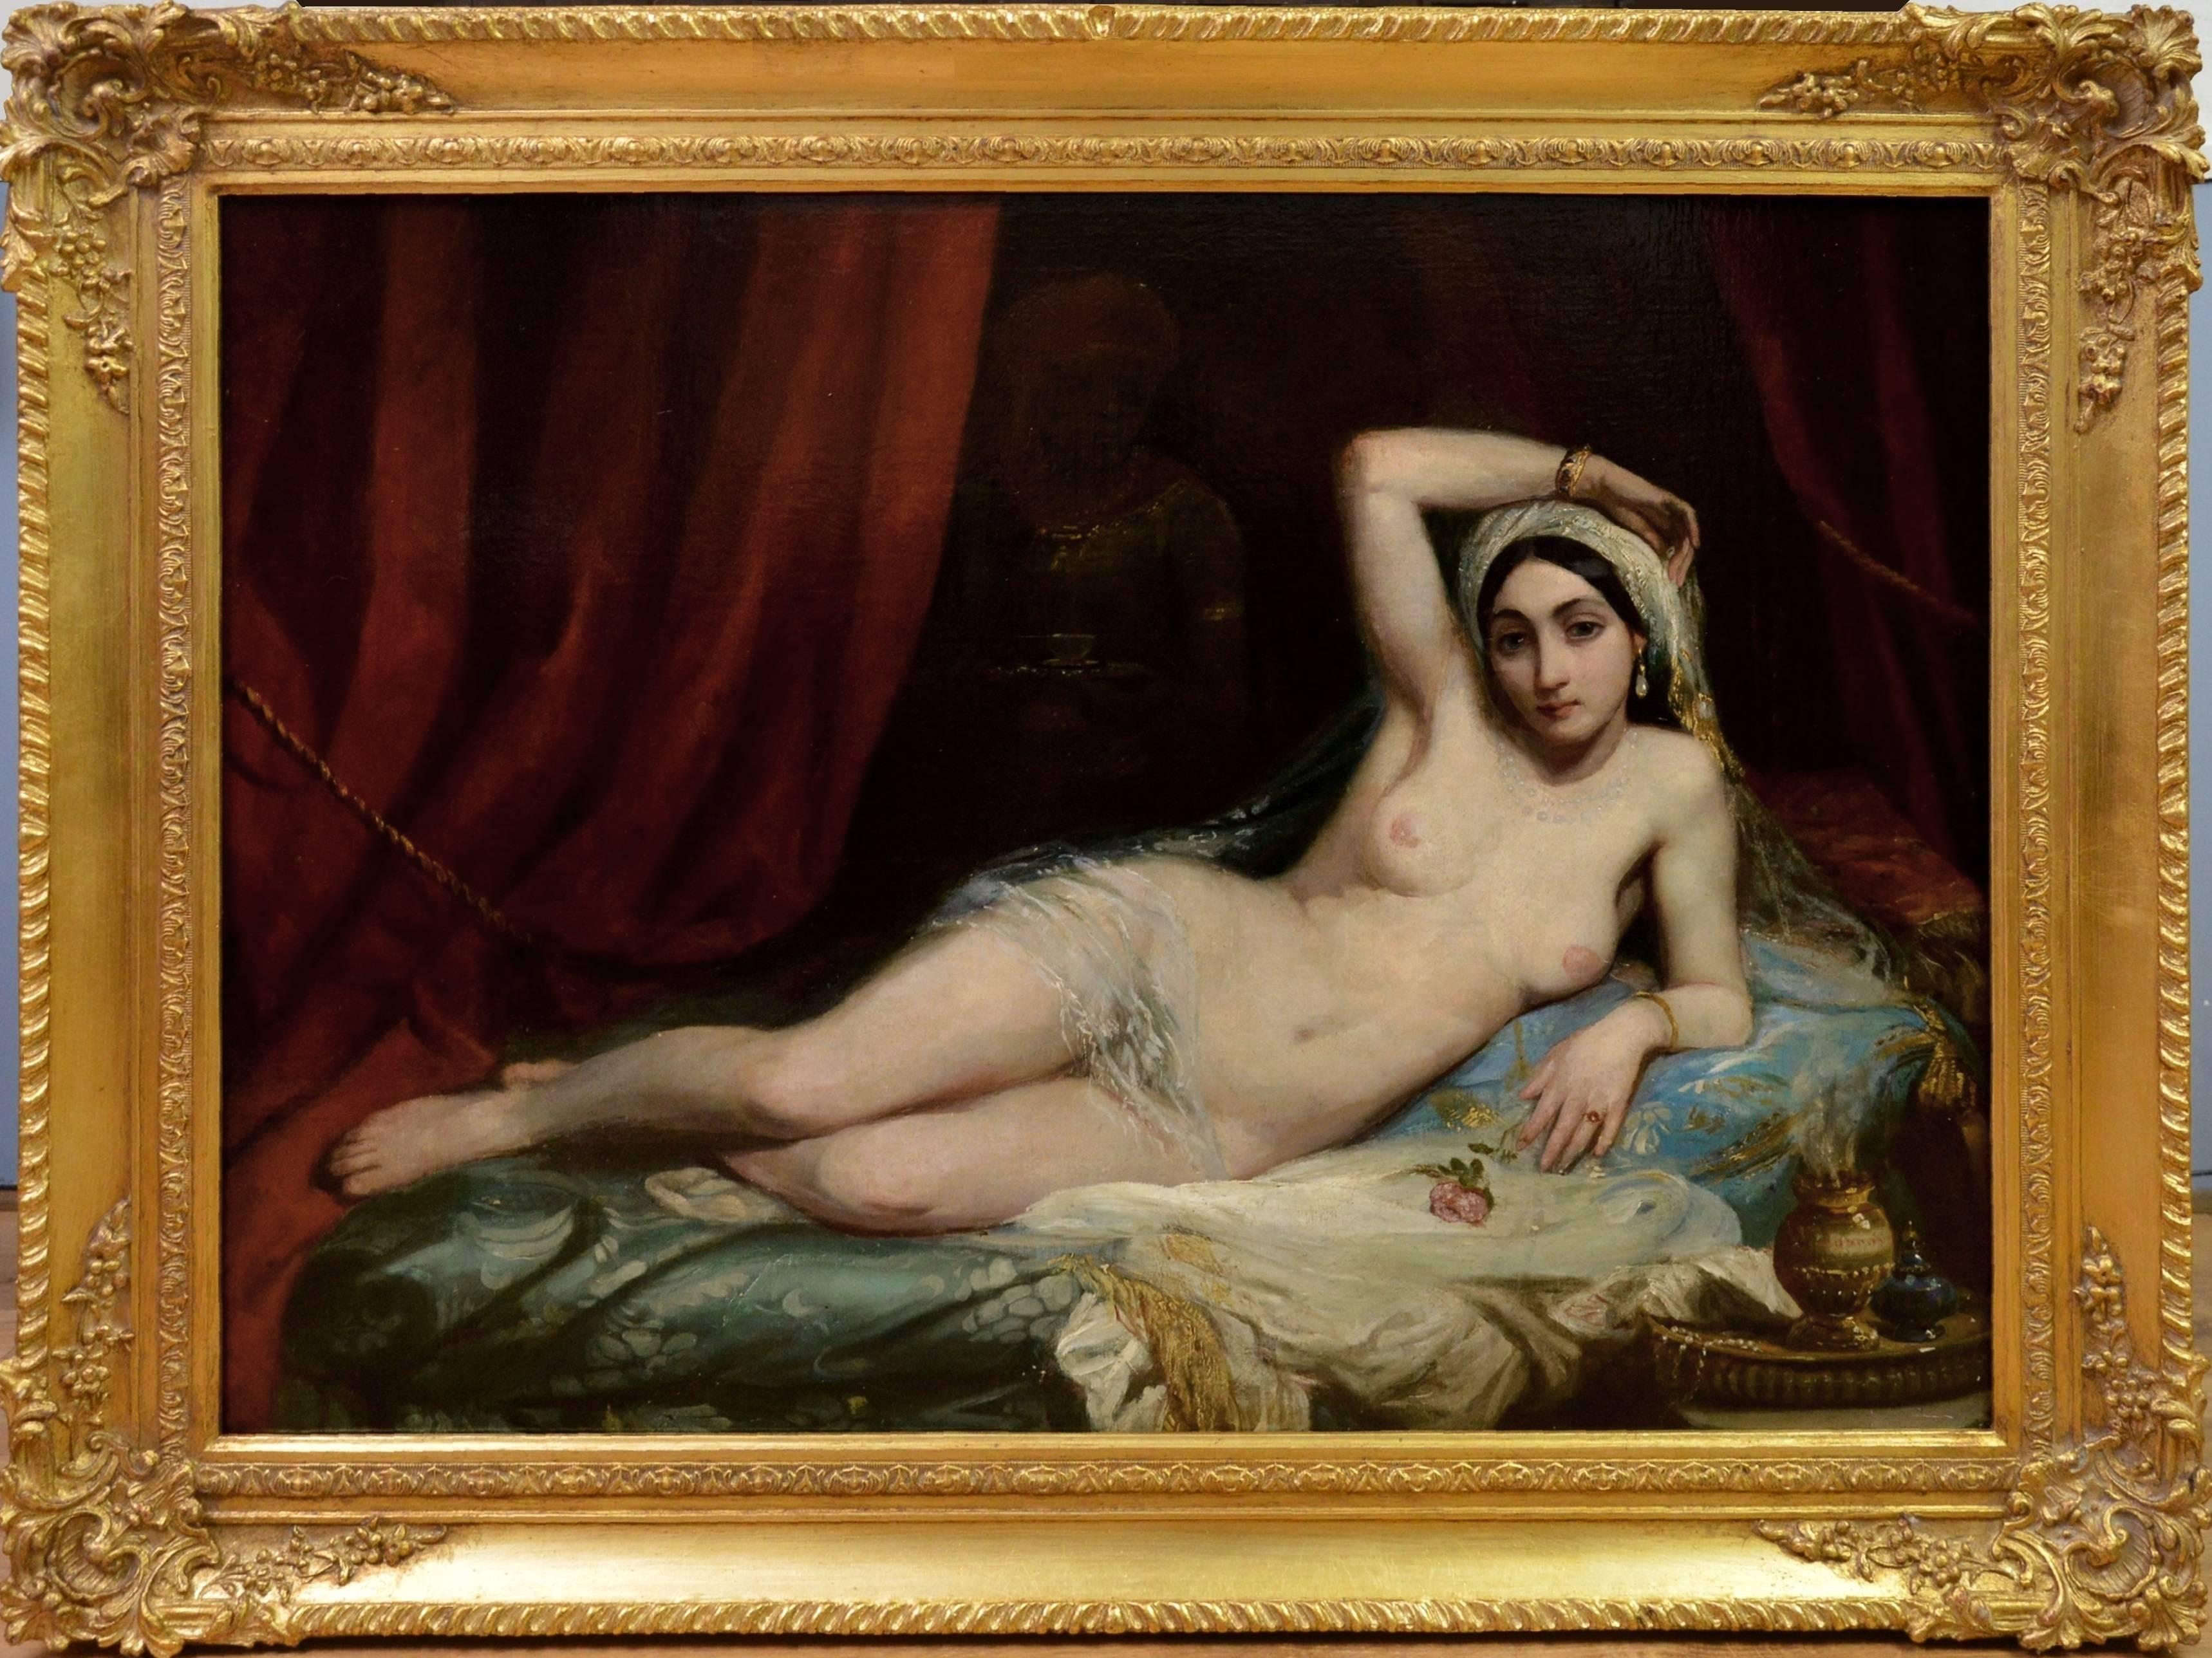 Adrien-Henri Tanoux Figurative Painting - Une Odalisque - 19th Century French Orientalist Nude Oil Painting - Harem Girl